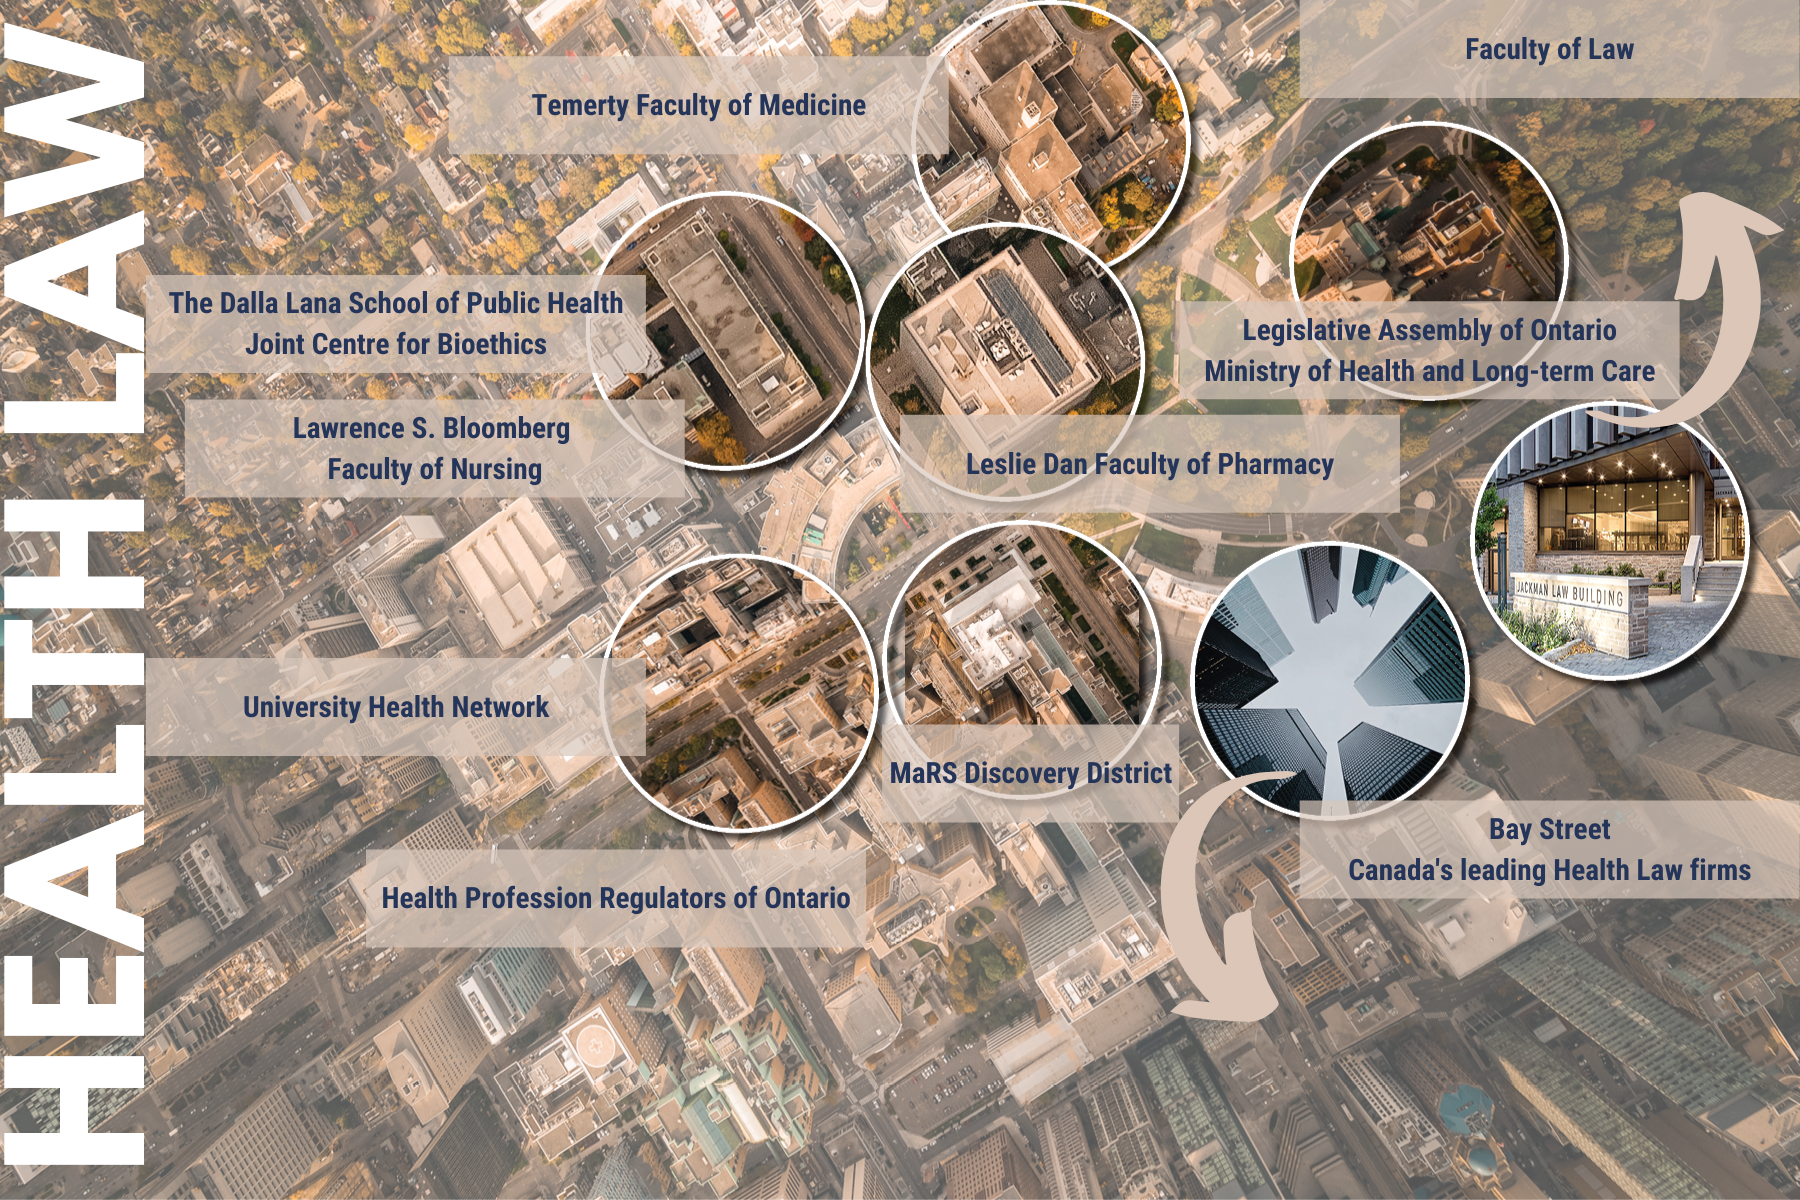 An aerial photo of the University of Toronto campus, at College Street and University Avenue. Text describing the Health Law ecosystem at the University of Toronto: Faculty of Law and U of T's Temerty Faculty of Medicine, Dalla Lana School of Public Health and Joint Centre for Bioethics, Lawrence S. Bloomberg Faculty of Nursing and Leslie Dan Faculty of Pharmacy; proximity to the Legislative Assembly of Ontario and Ministry of Health and Long-term Care; MaRS Discovery District, a not-for-profit corporation founded to commercialize publicly funded medical research; University Health Network hospitals; Health Profession Regulators of Ontario located in Beaverton, Ontario; and Canada's leading Health Law firms on Toronto's Bay Street.